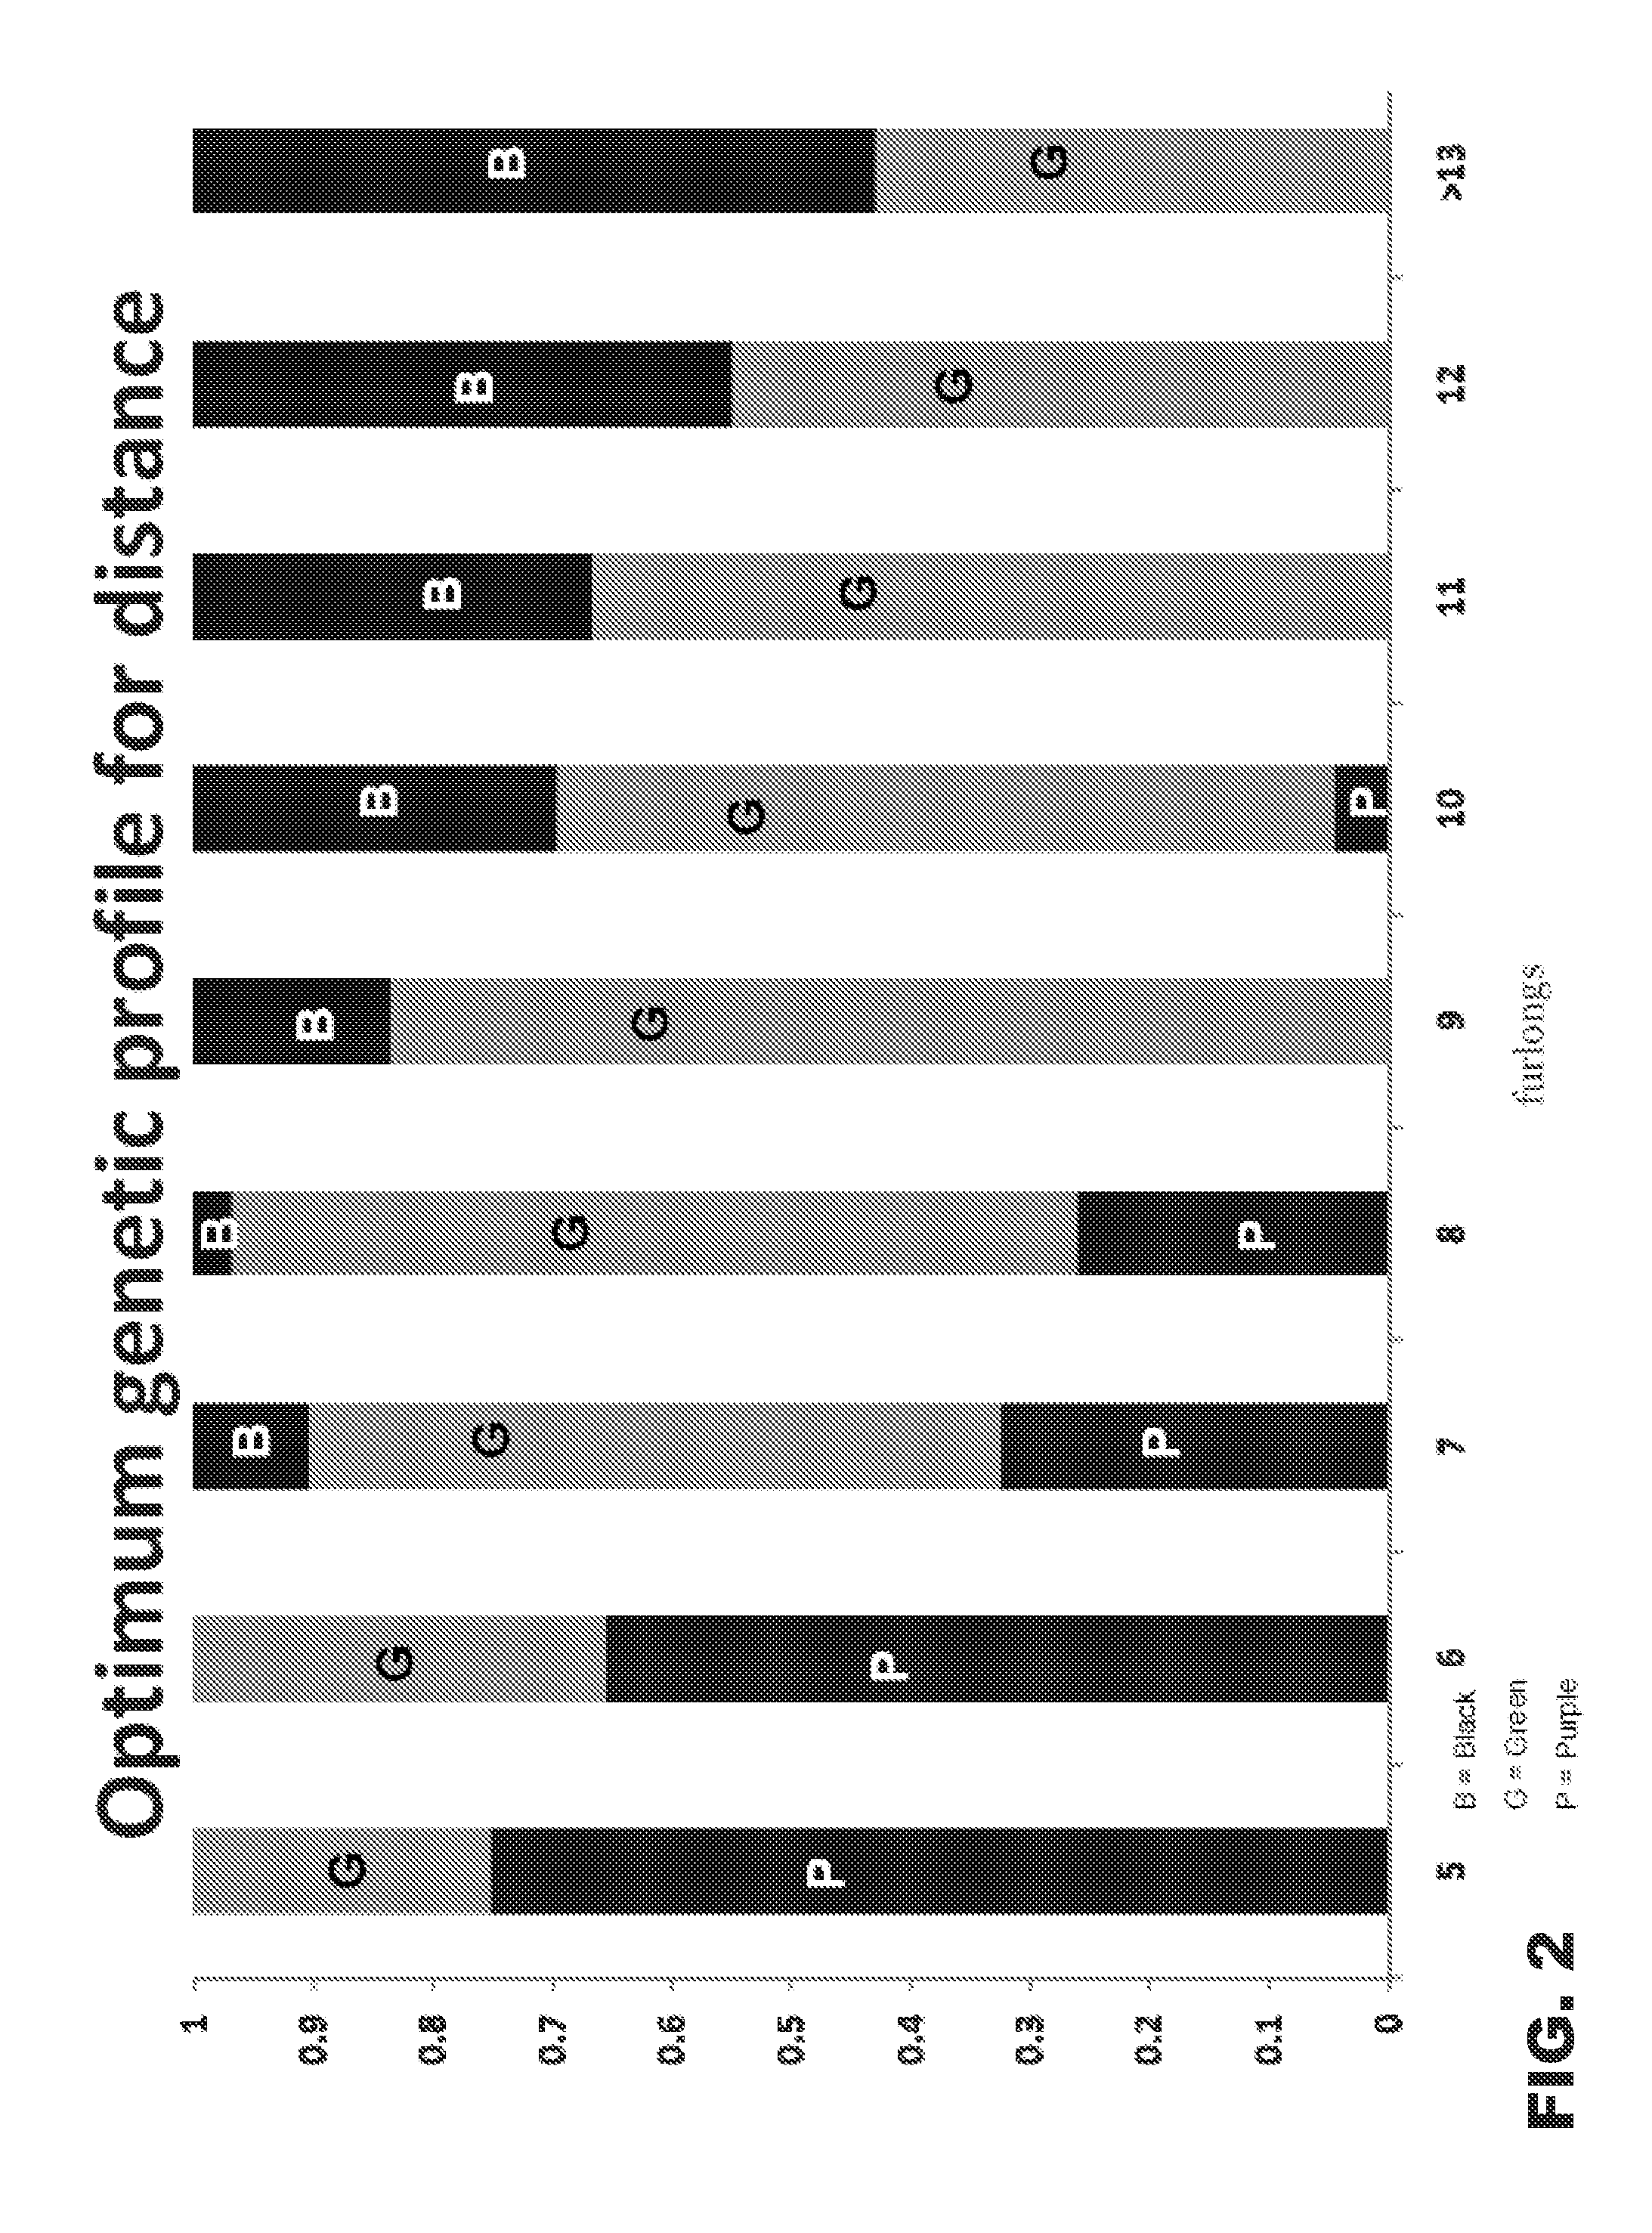 Method for predicting the athletic performance potential of a subject